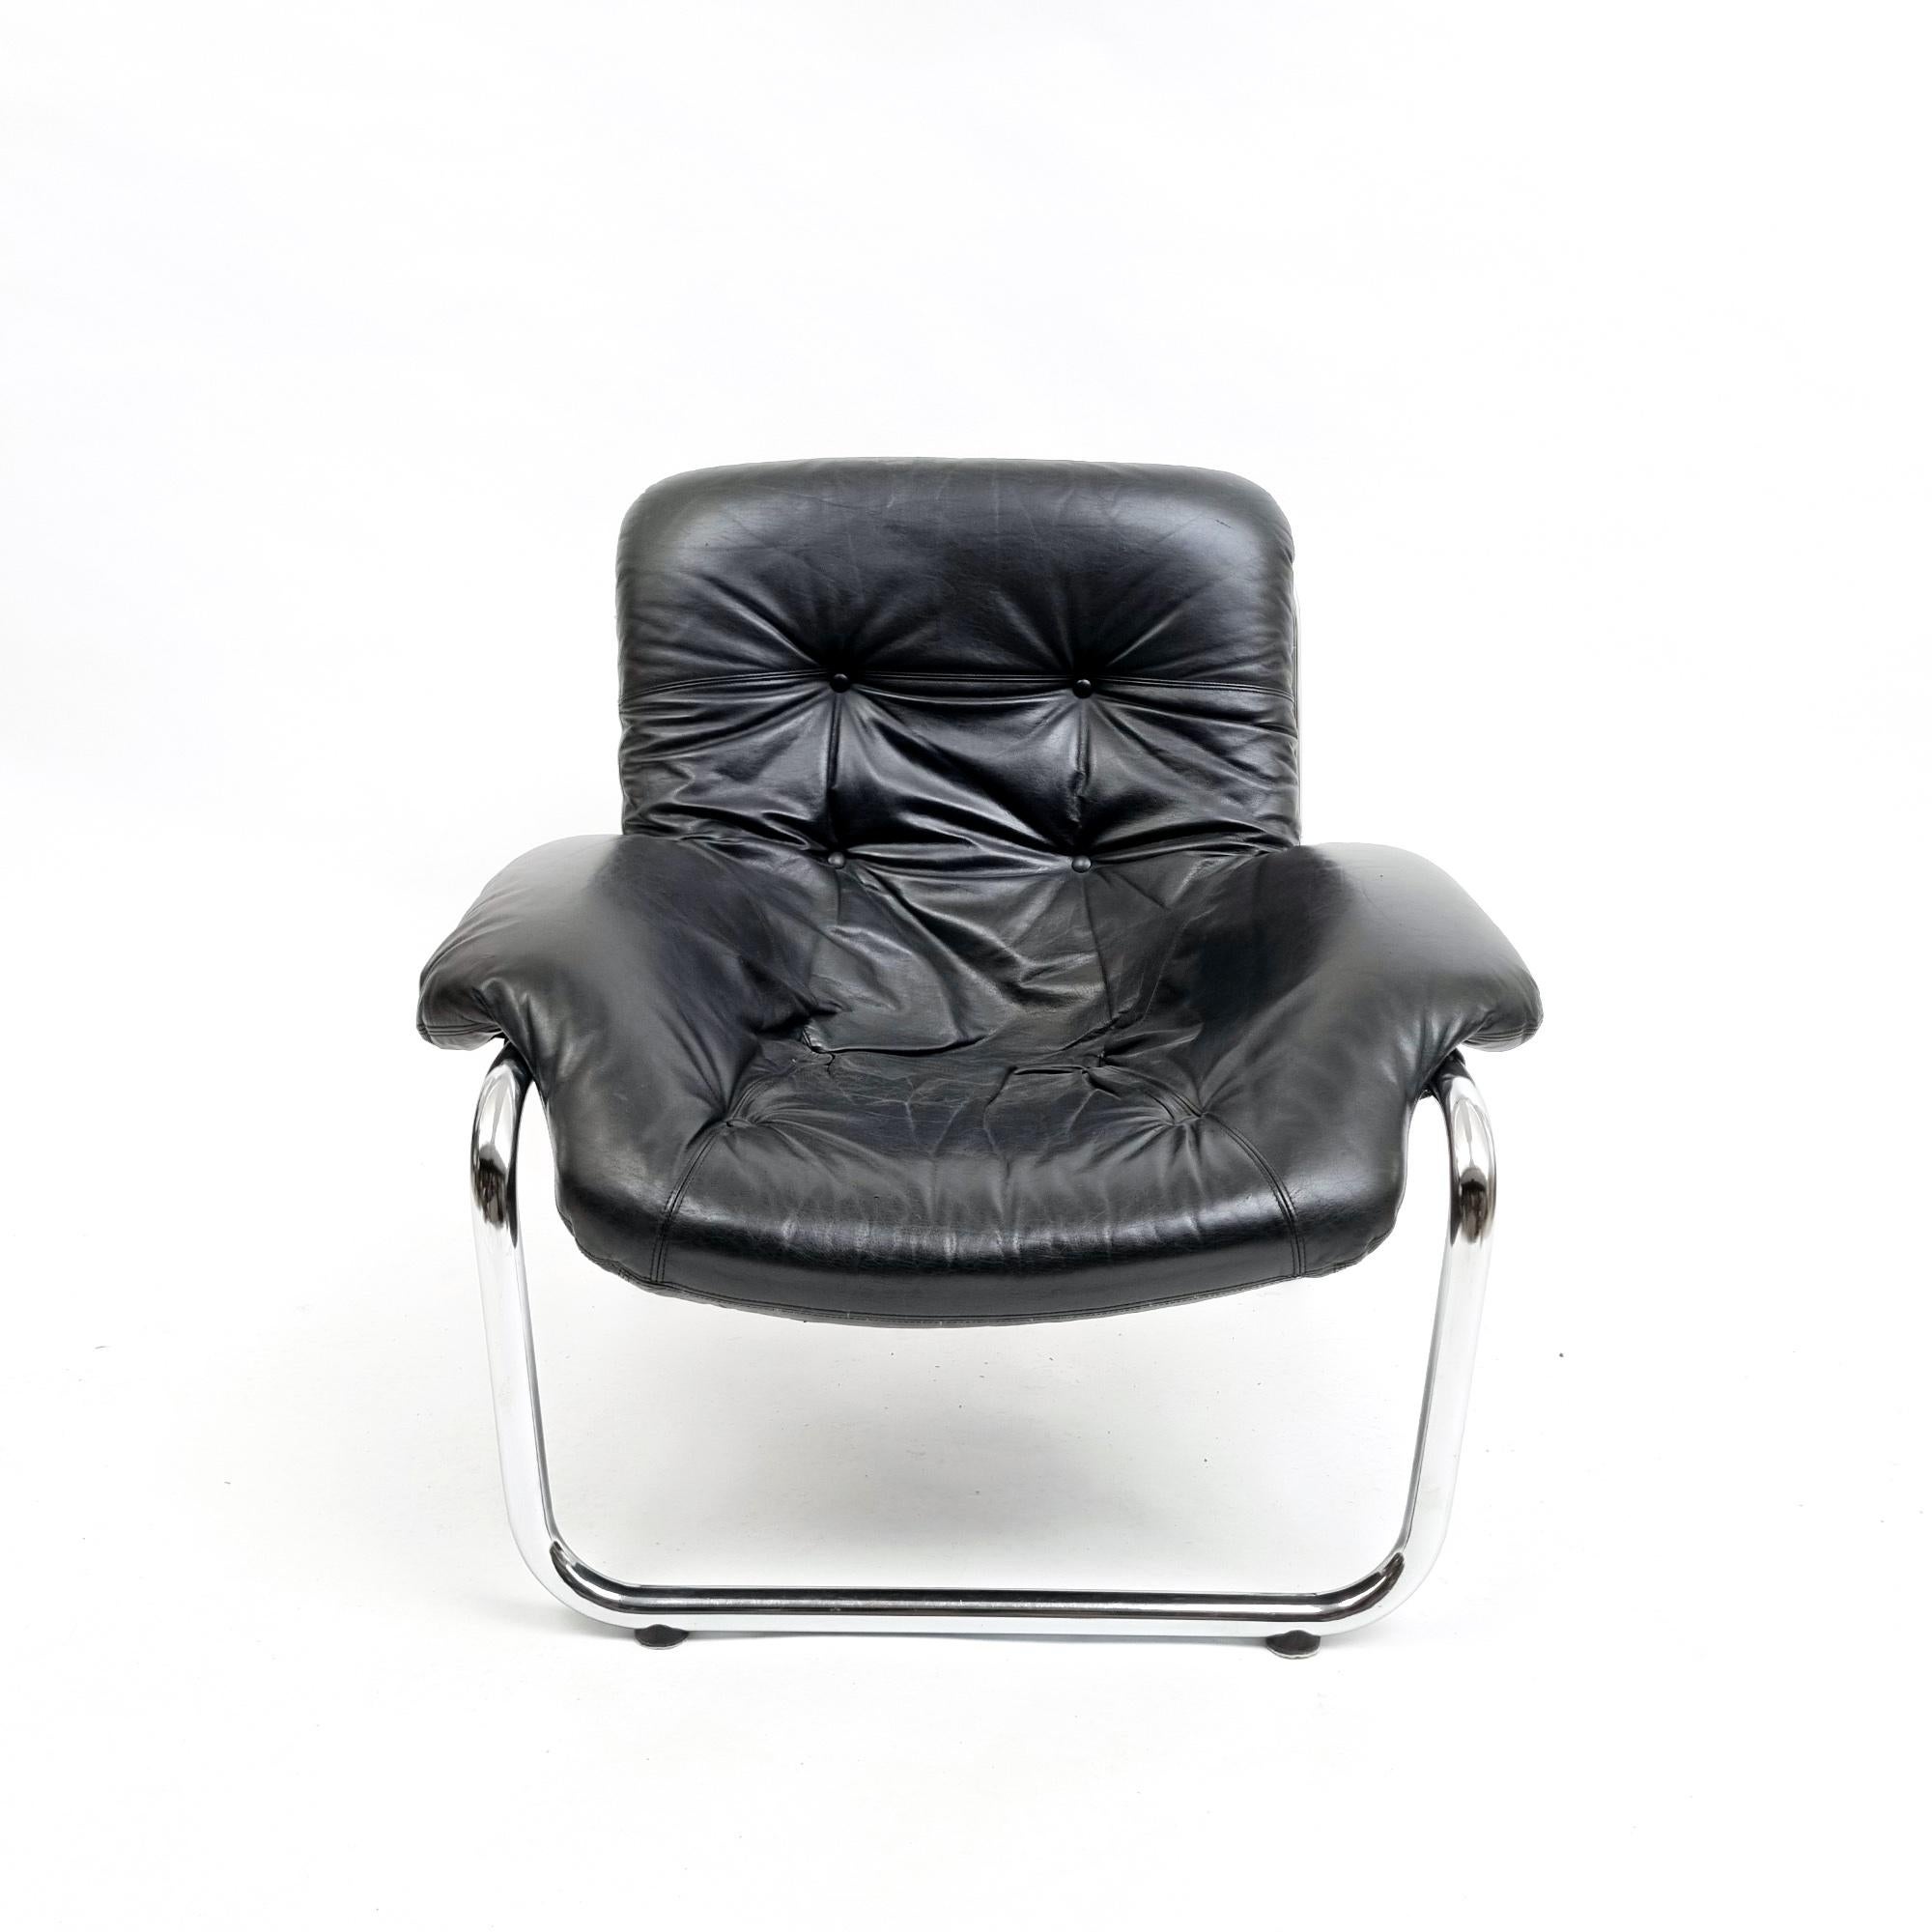 A stunning vintage armchair, often attributed to Marcel Breuer and dating back to the 1970s. The chair boasts a chromed metal structure and black leather upholstery in excellent condition. With canvas ties and black leather armrests on chrome steel